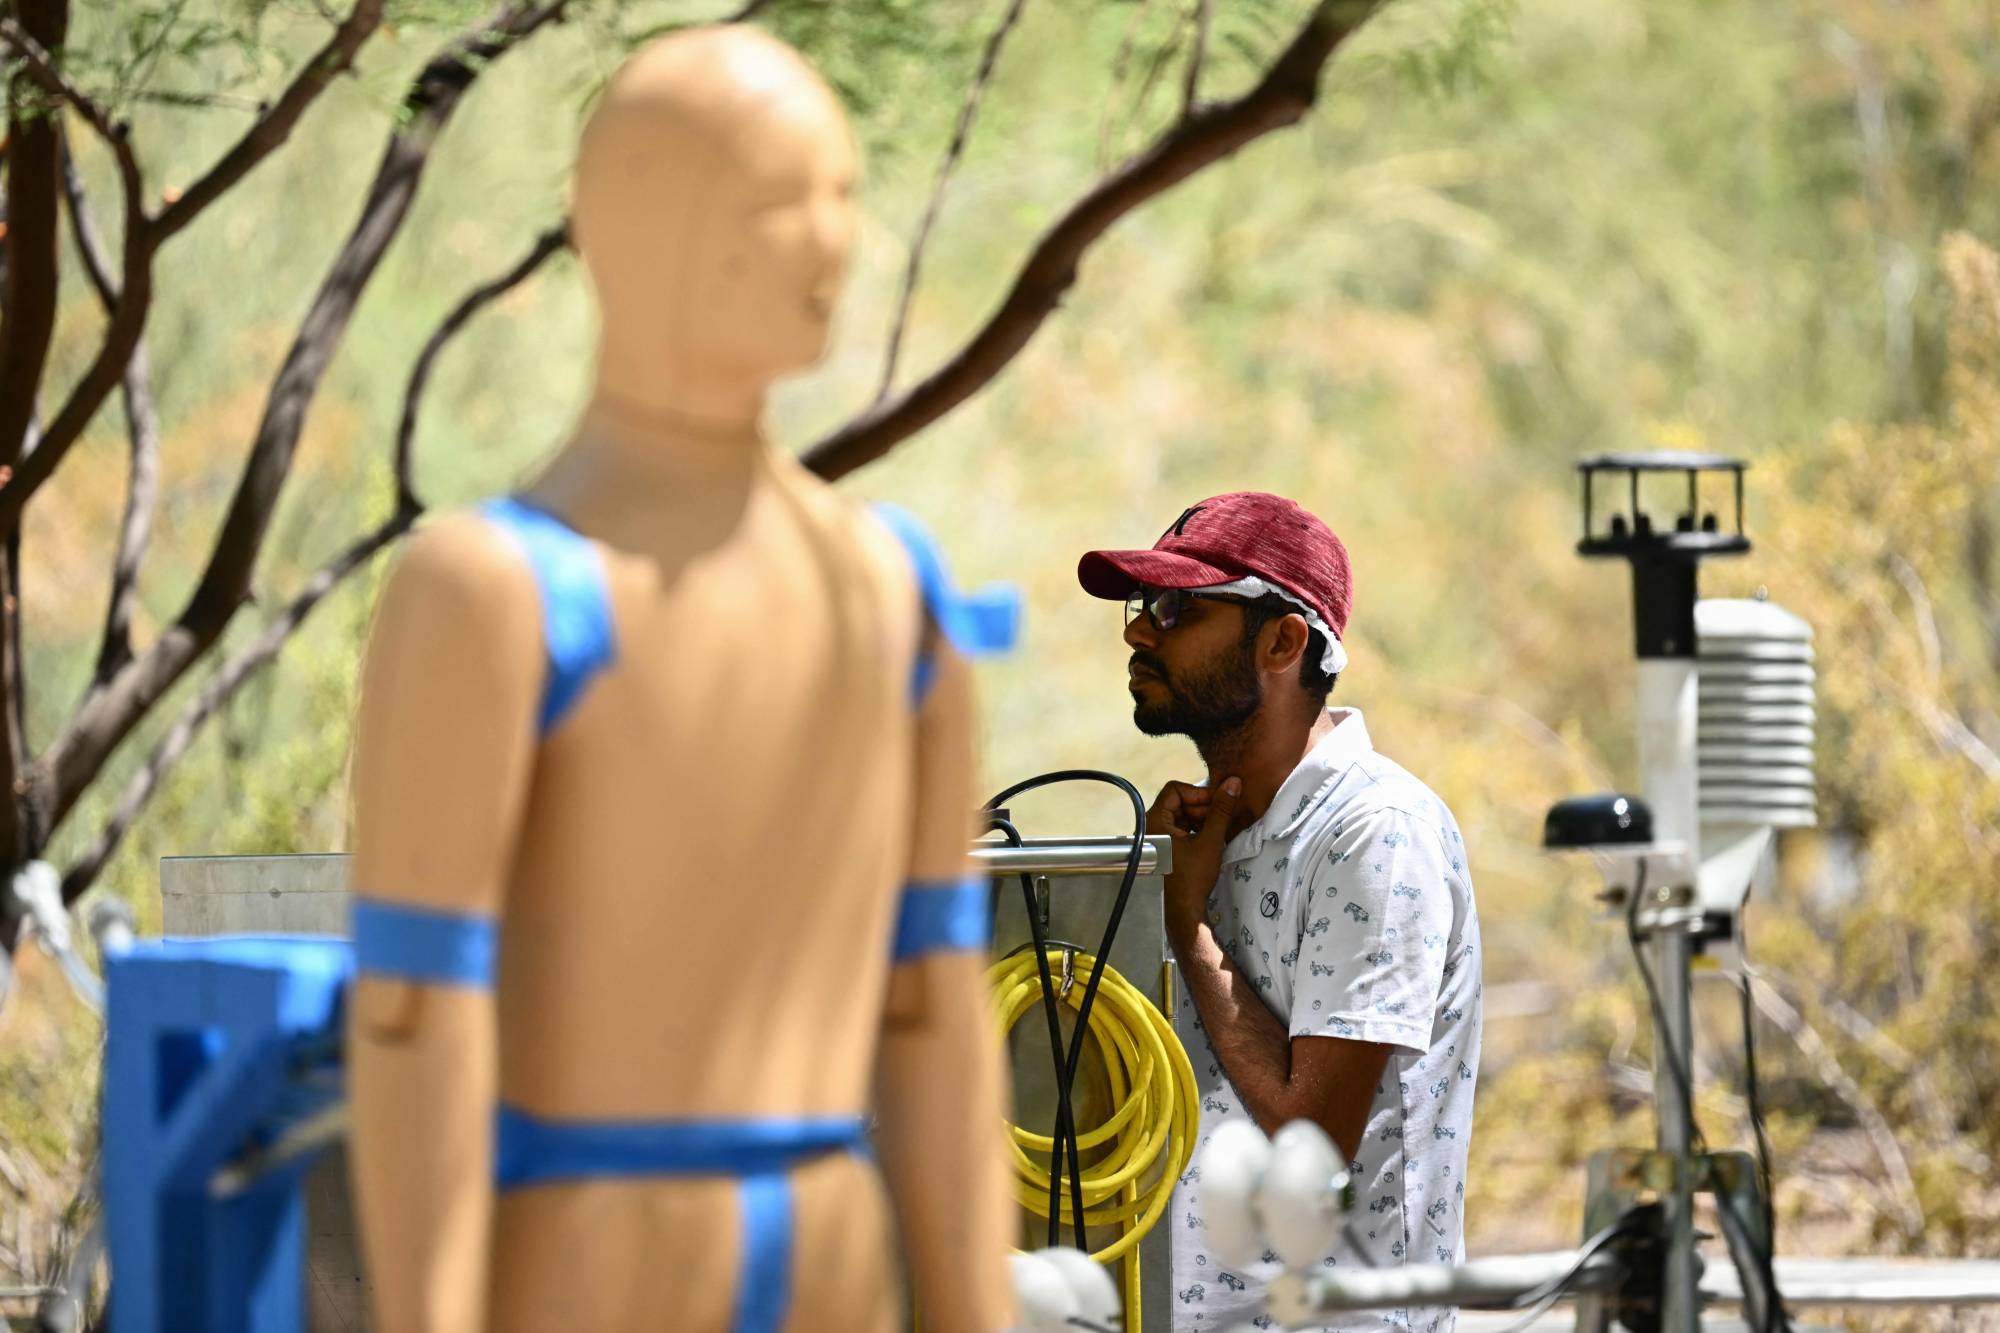 Ankit Joshi monitors a heat and wind experiment with ANDI, an Advanced Newton Dynamic Instrument, to learn more about the effect of heat exposure on the human body at Arizona State University on Thursday, during a record heat wave in Phoenix.  | AFP-JIJI